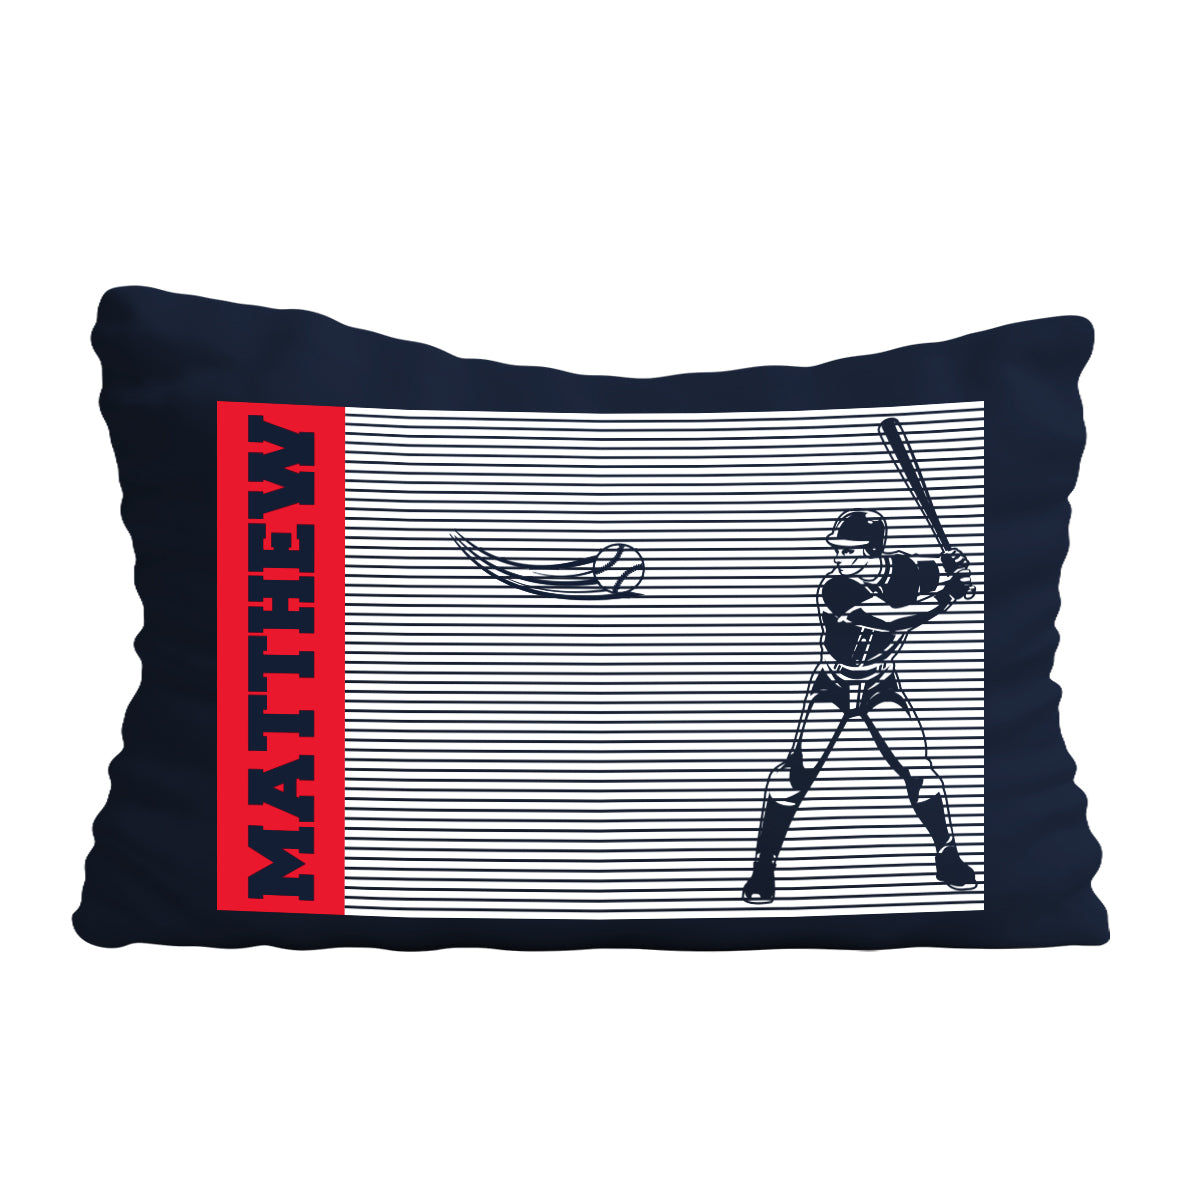 Baseball Player Personalized Name Navy Pillow Case 20 x 27""